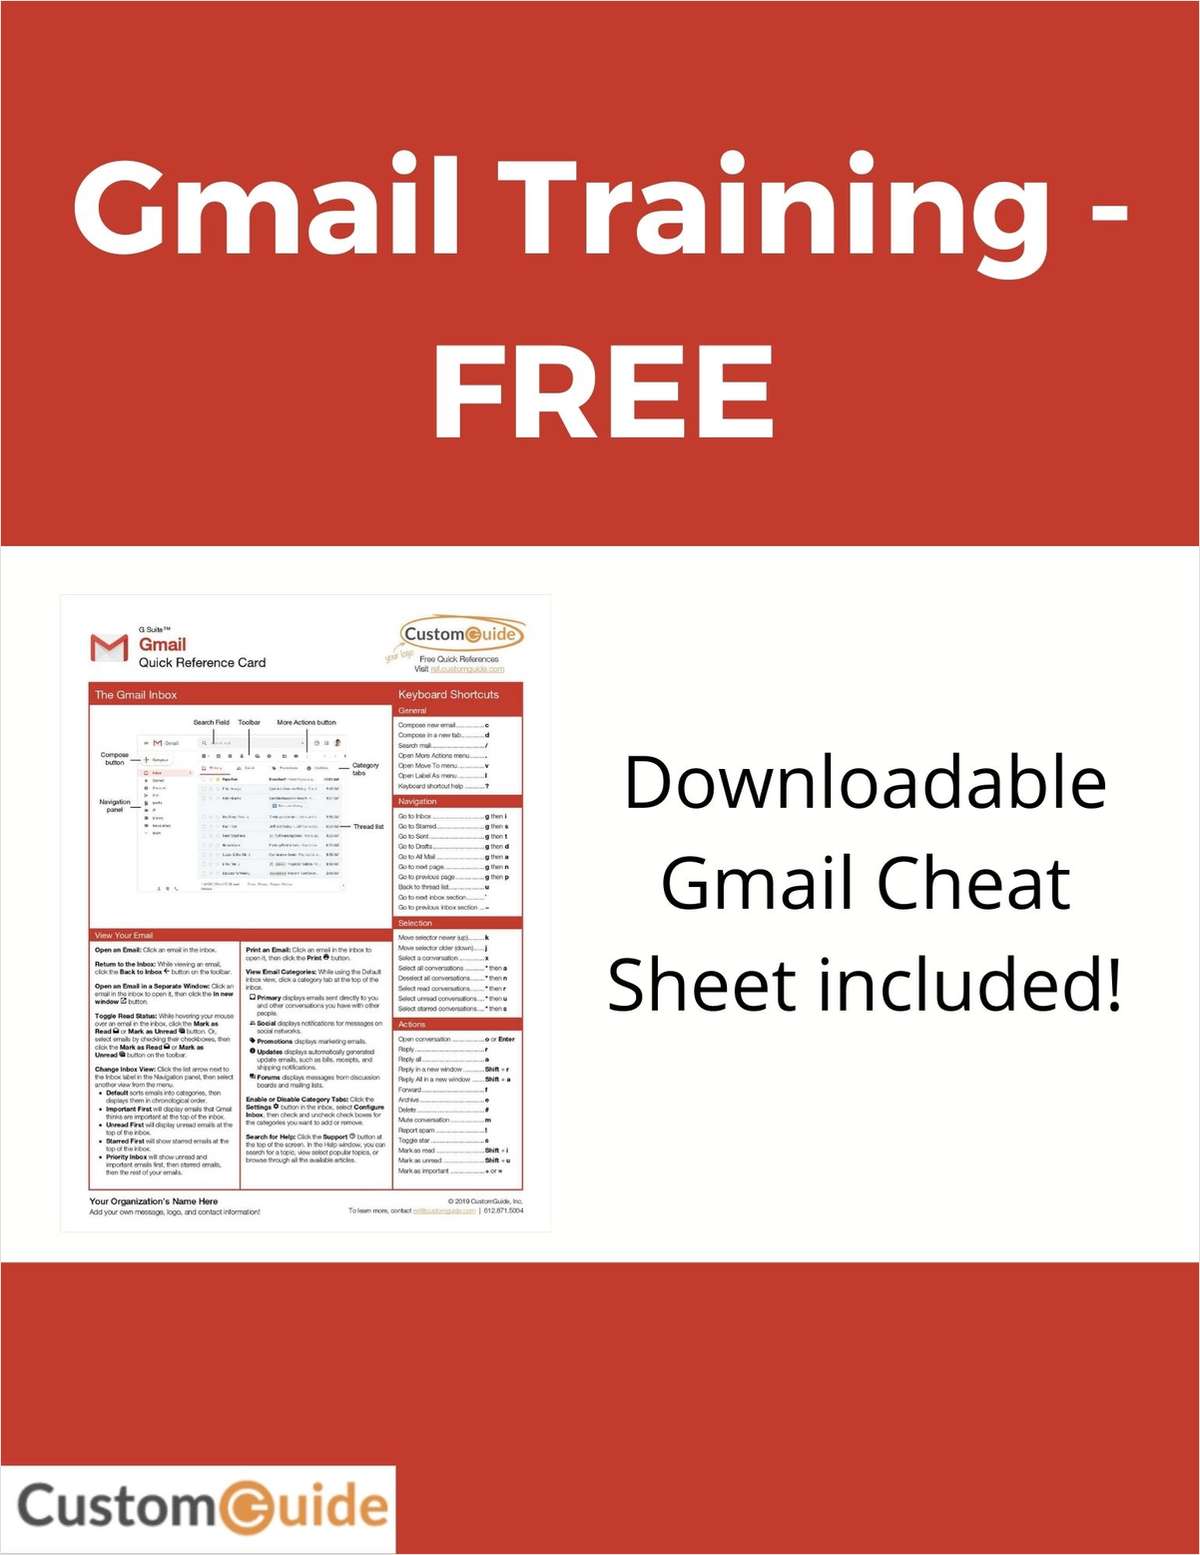 Gmail Training Course - FREE